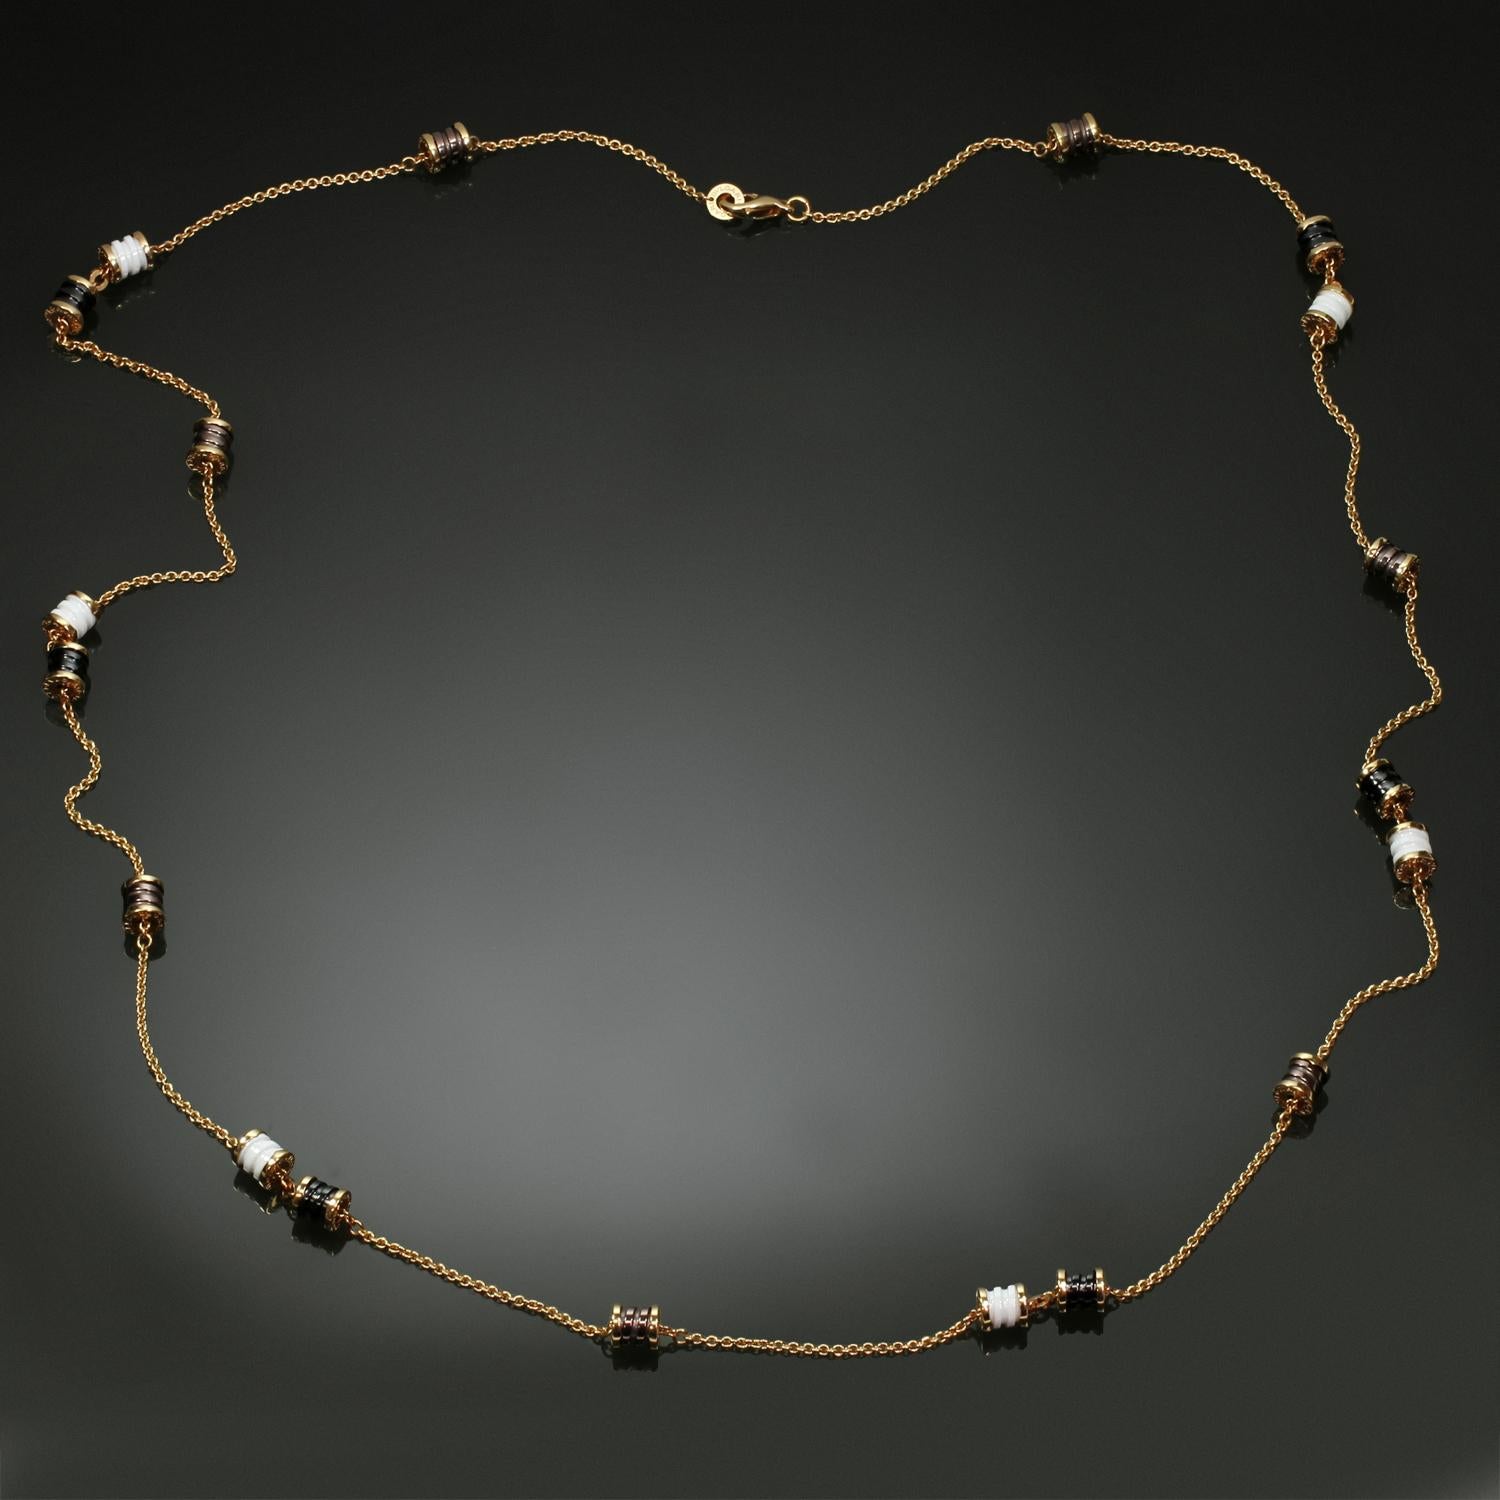 This gorgeous Bvlgari necklace from the iconic B.Zero1 collection is crafted in 18k rose gold and accented with 19 rondels in white, black, and bronze ceramics. Made in Italy circa 2020s. Measurements: 0.27